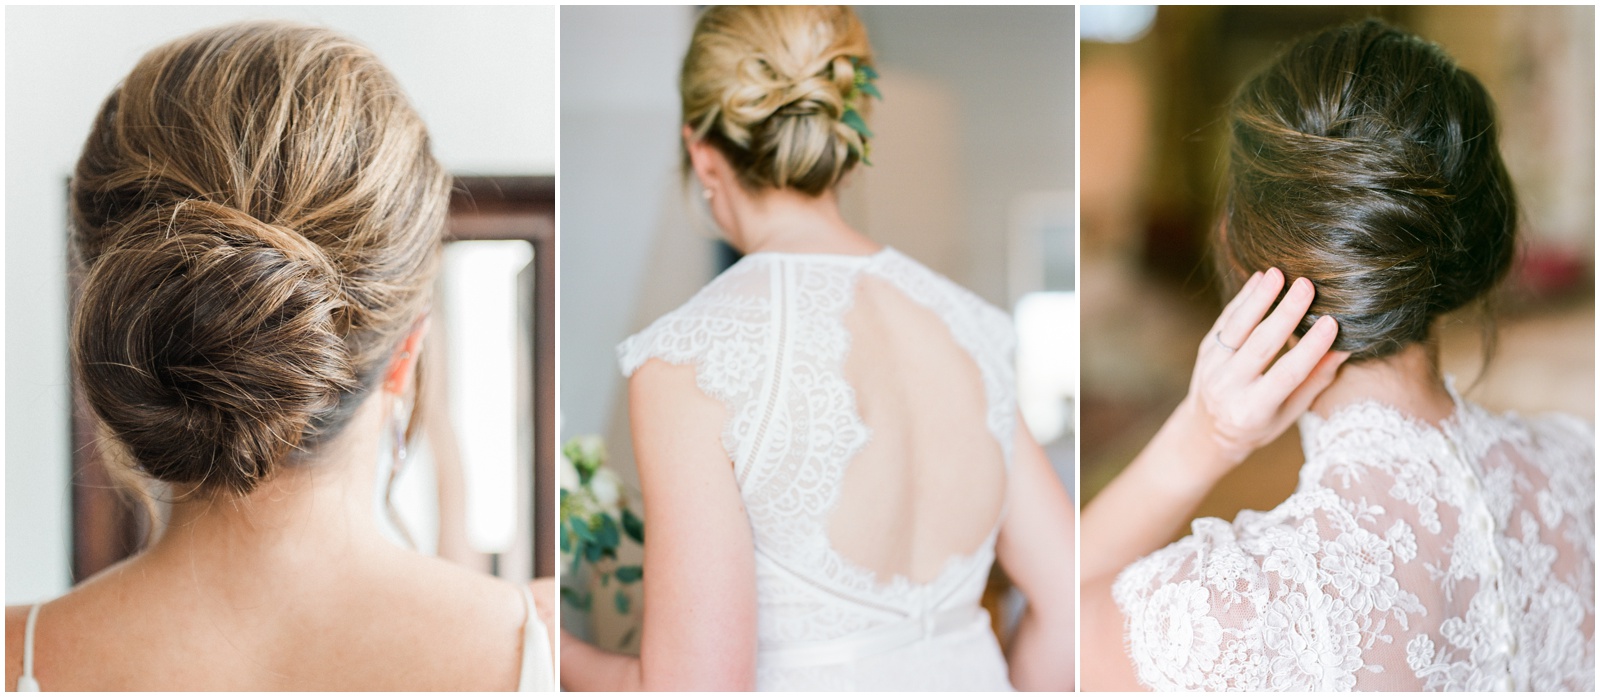 classic wedding updo hairstyles inspiration